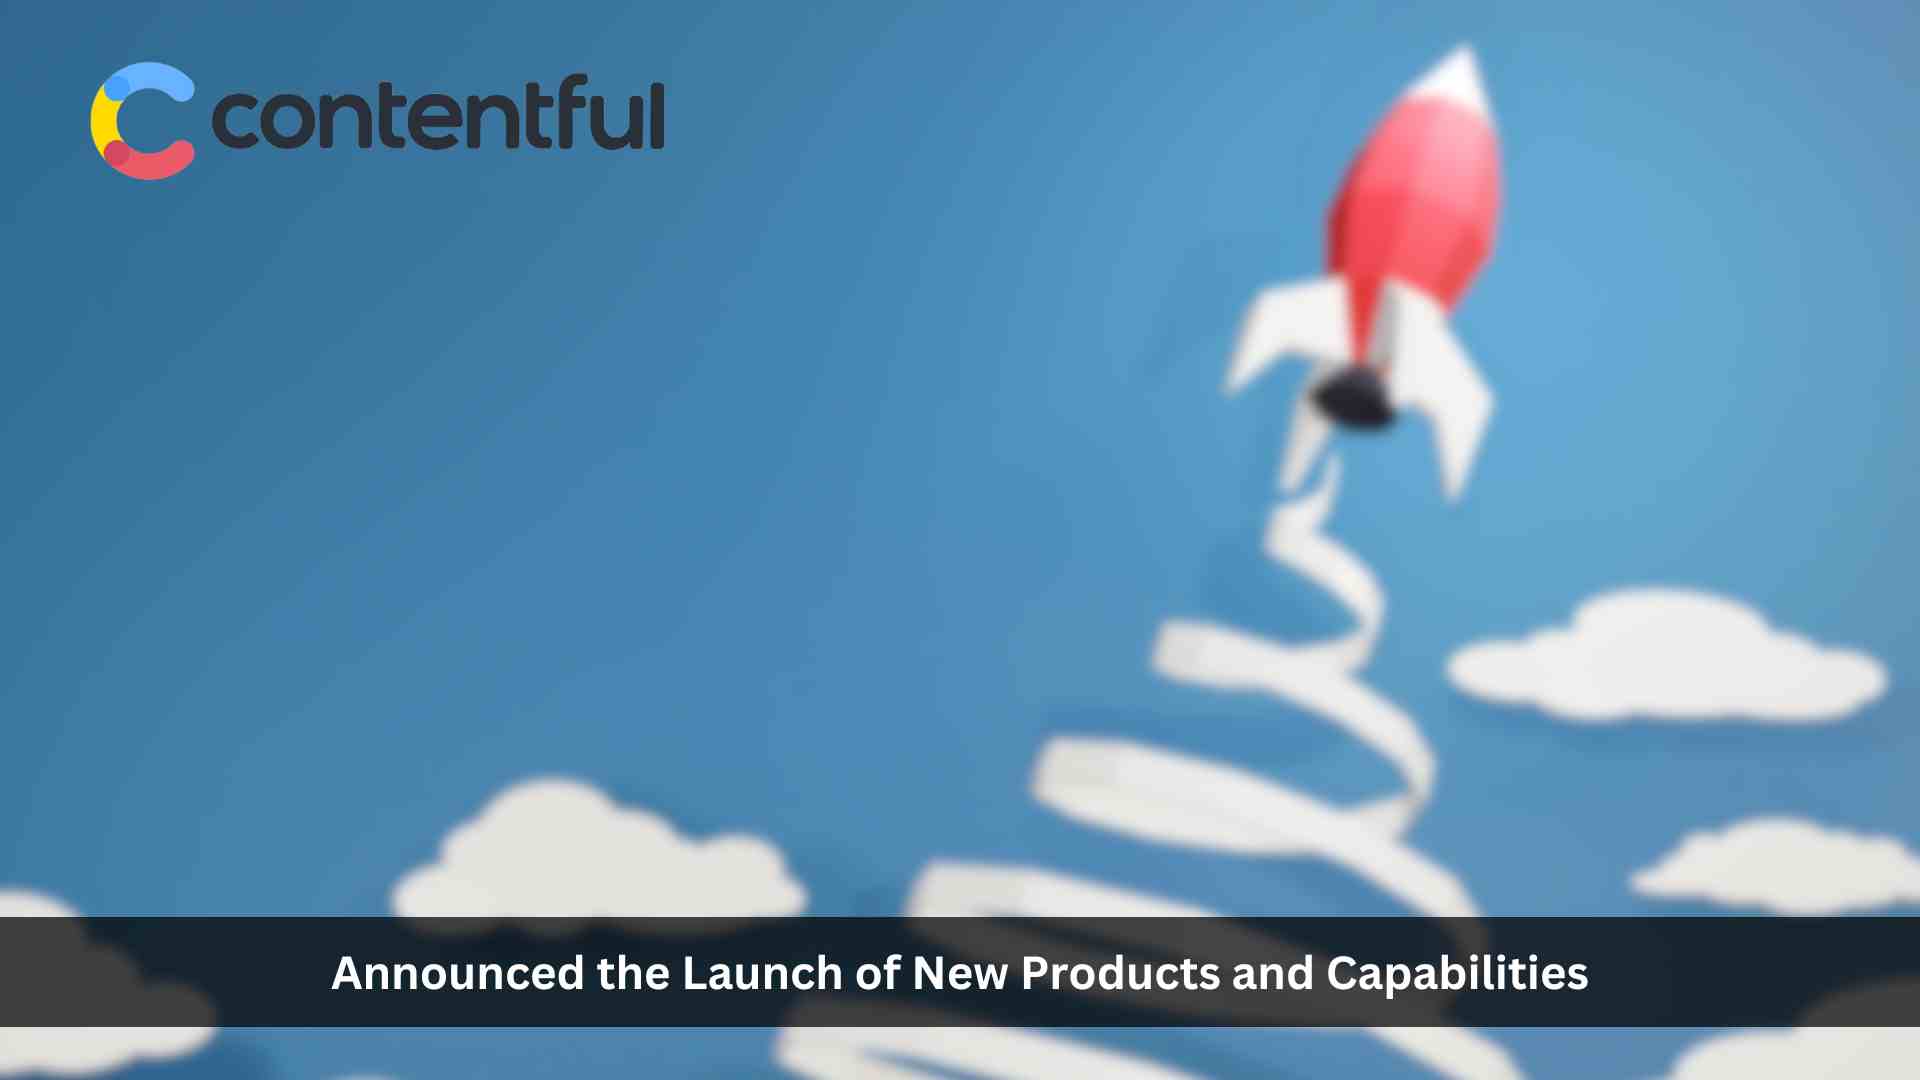 Contentful Announces New Products and Capabilities for the Contentful® Composable Content Platform to Intelligently Accelerate Creativity of Digital Teams